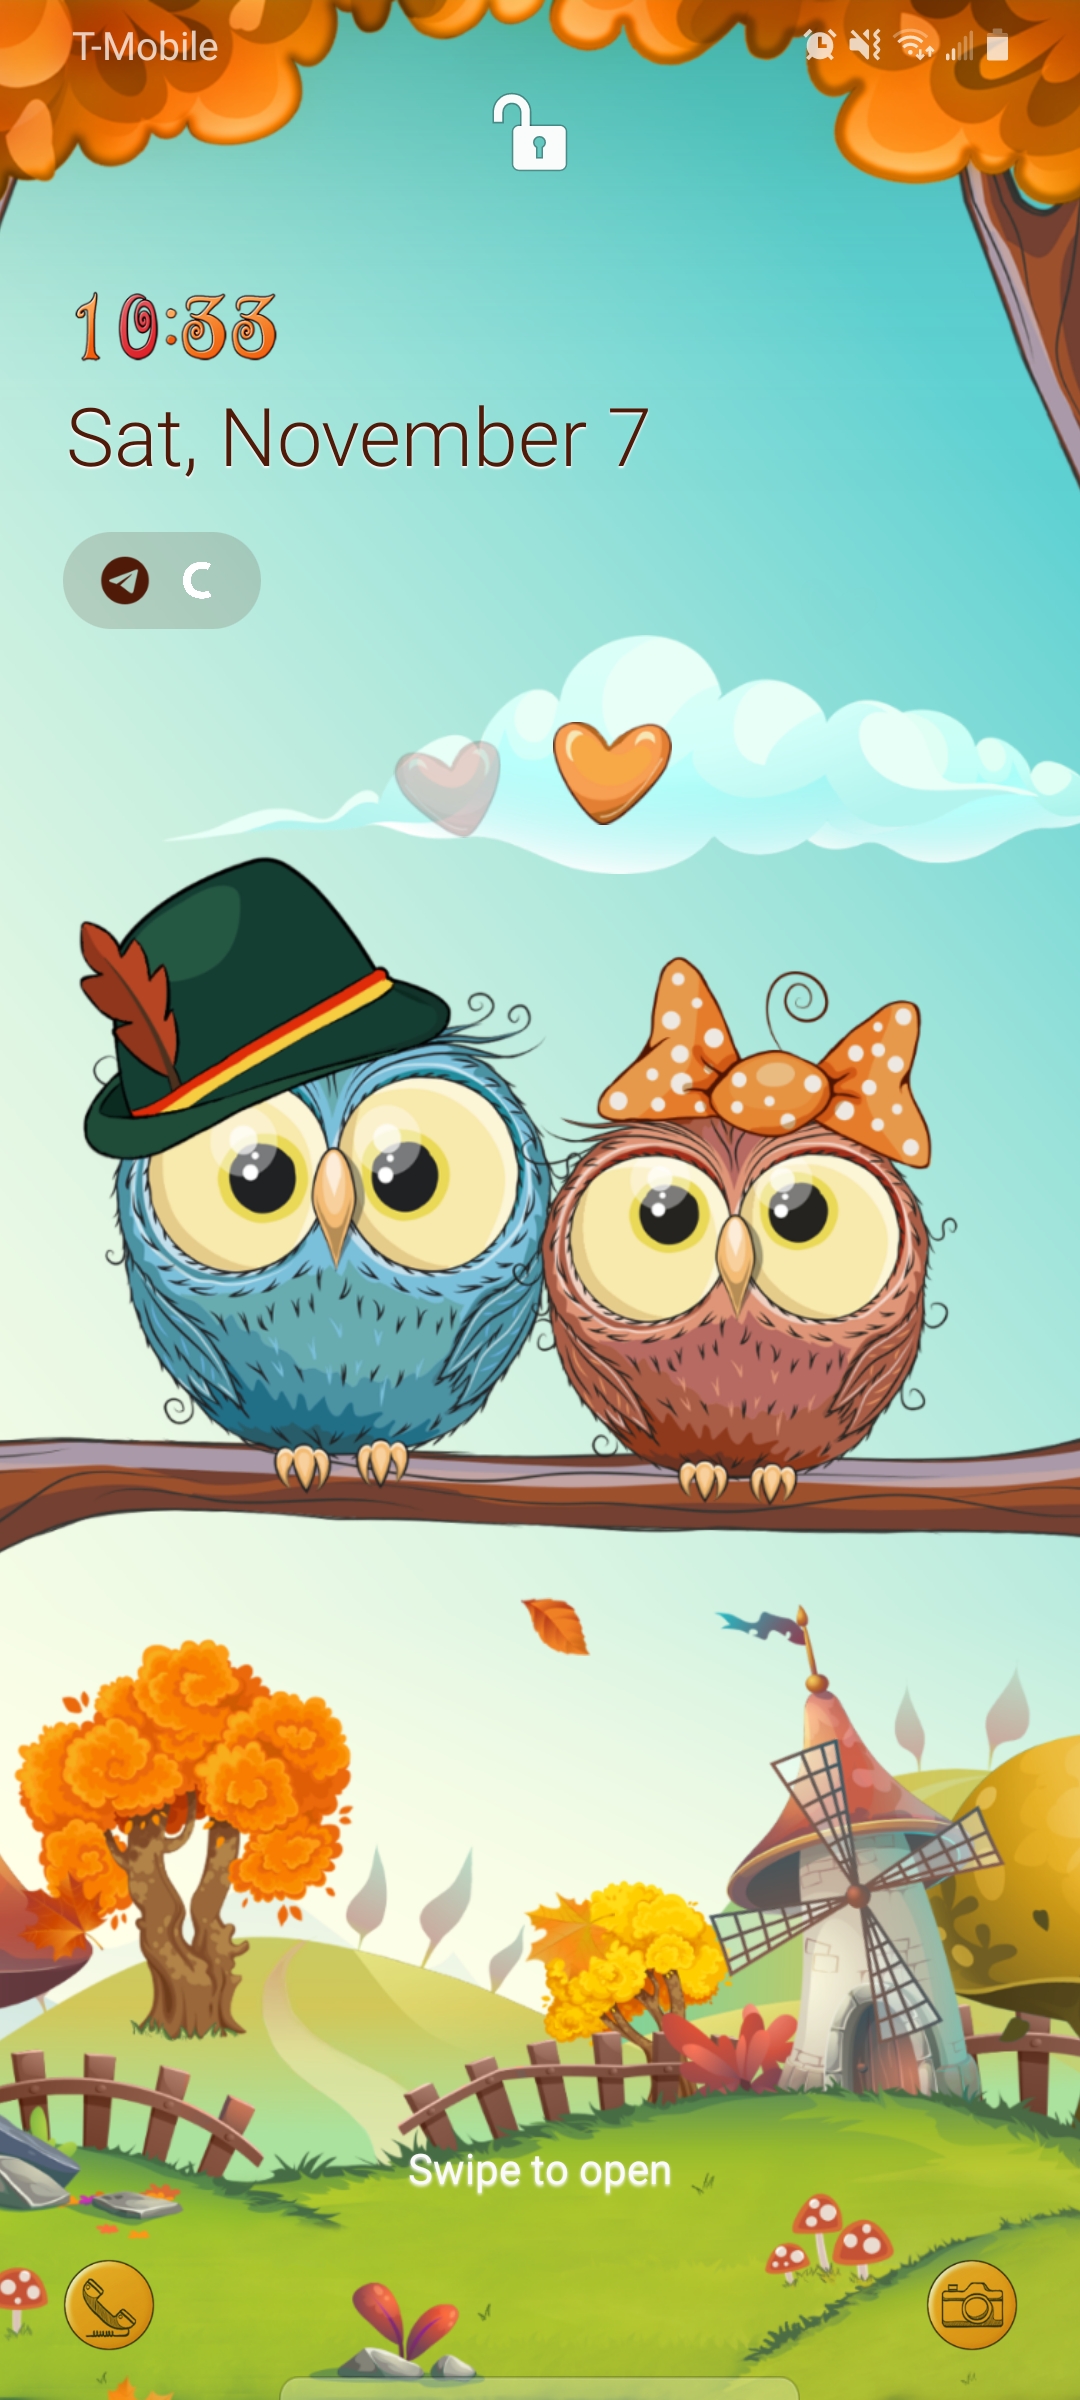 Picture of two owls wearing formal wear sitting in a tree